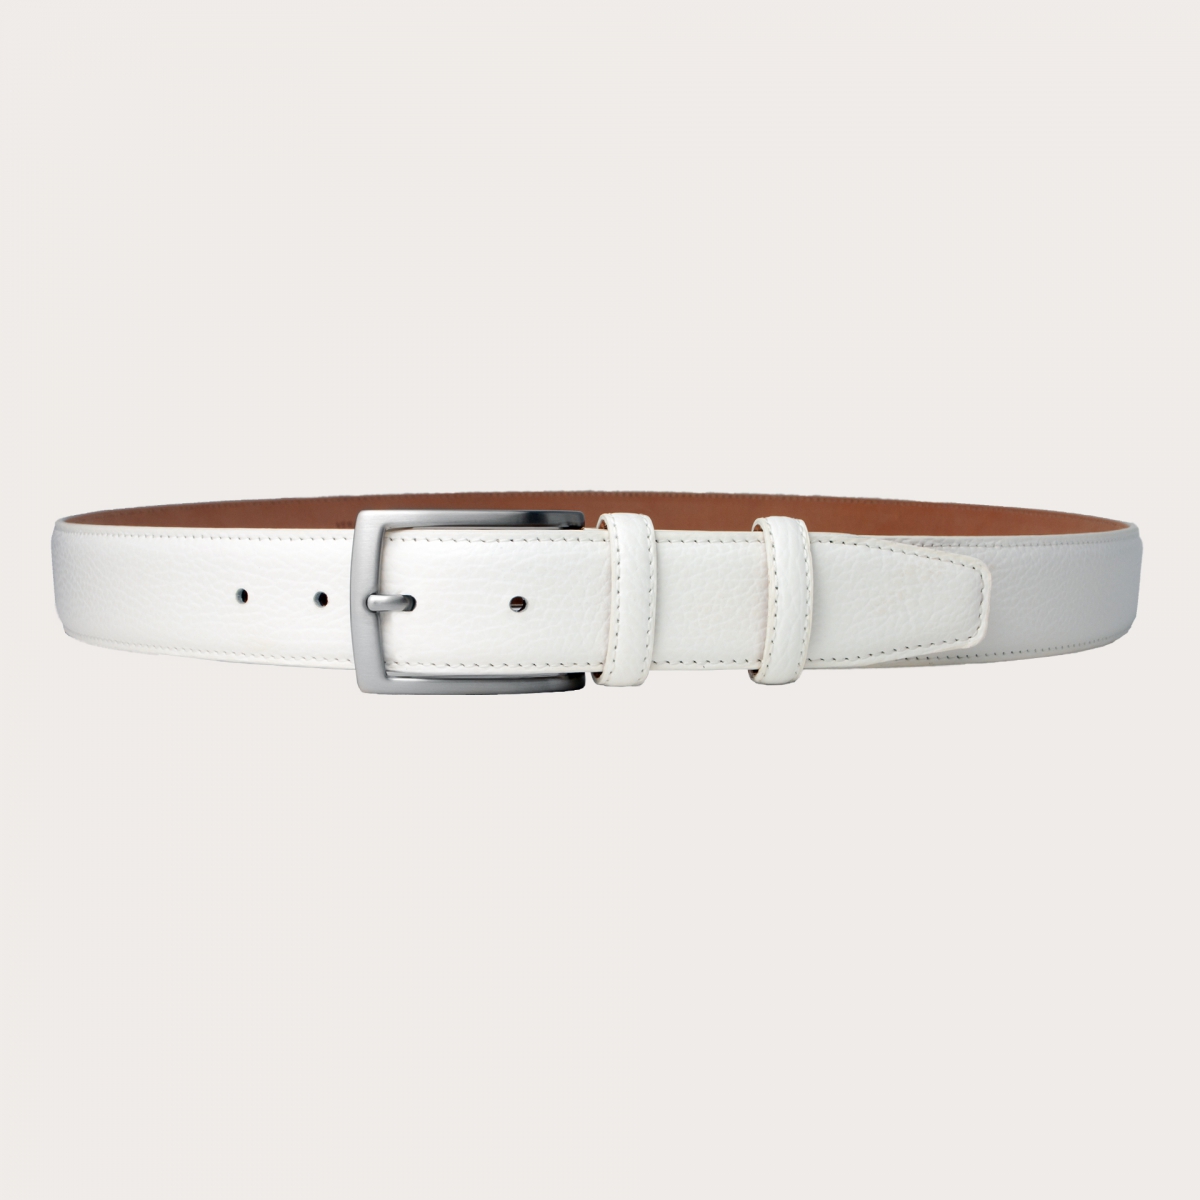 Elegant casual belt in white leather